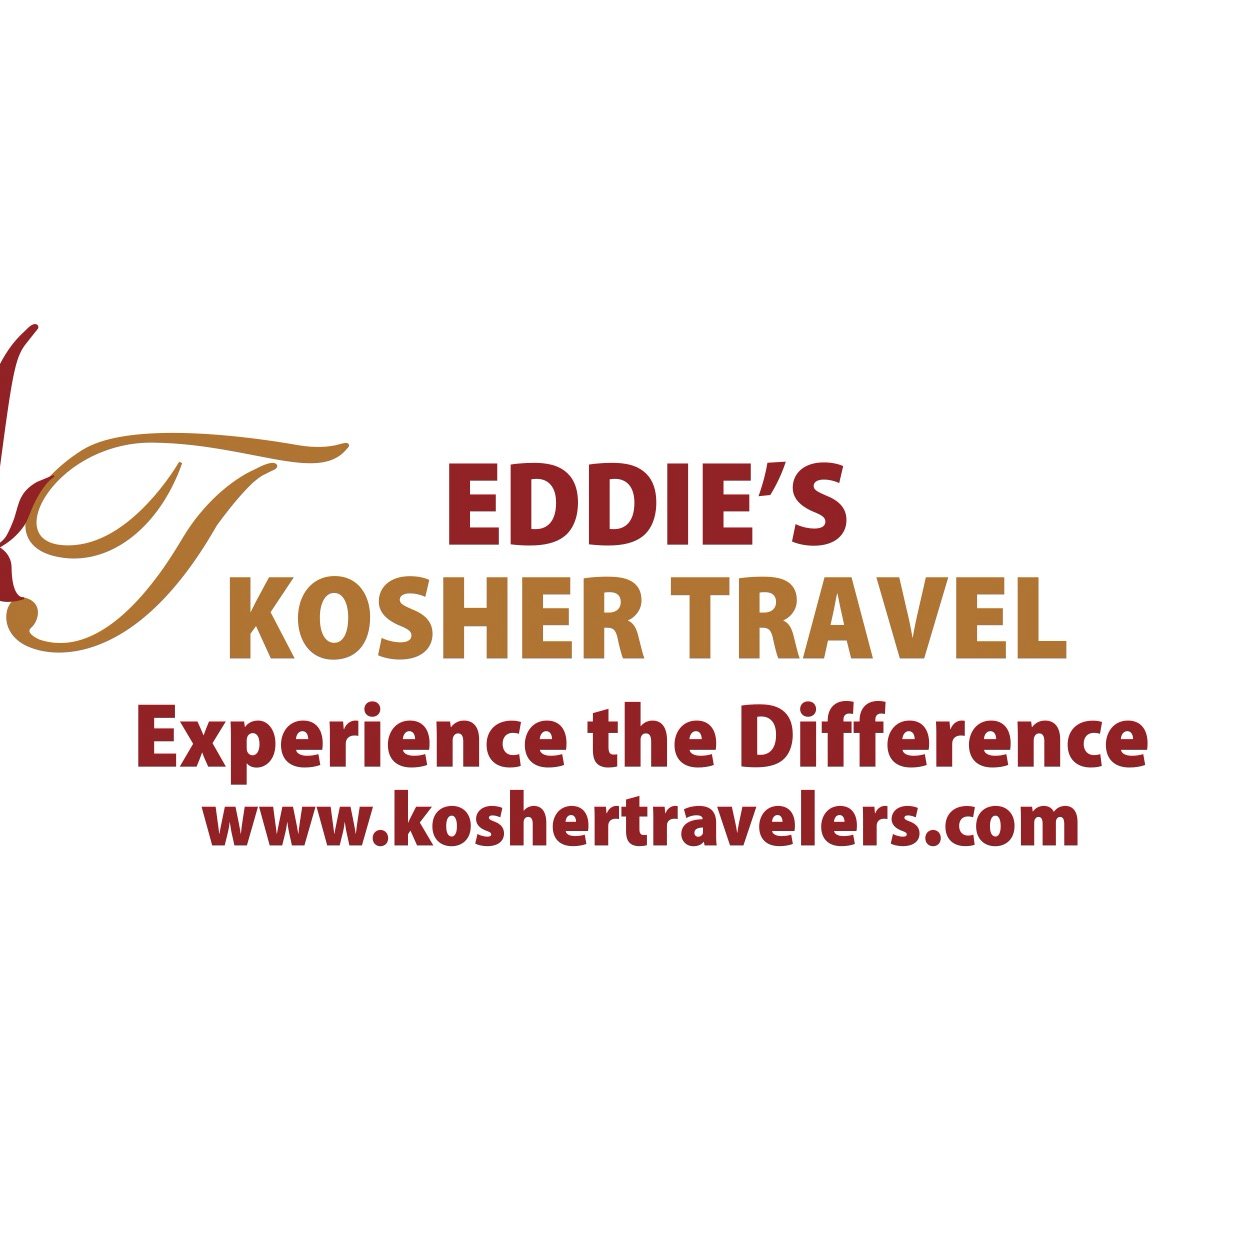 @wetravelkosher or  Eddie's Kosher Travel is one of the most respected travel agencies servicing kosher travelers throughout the globe.